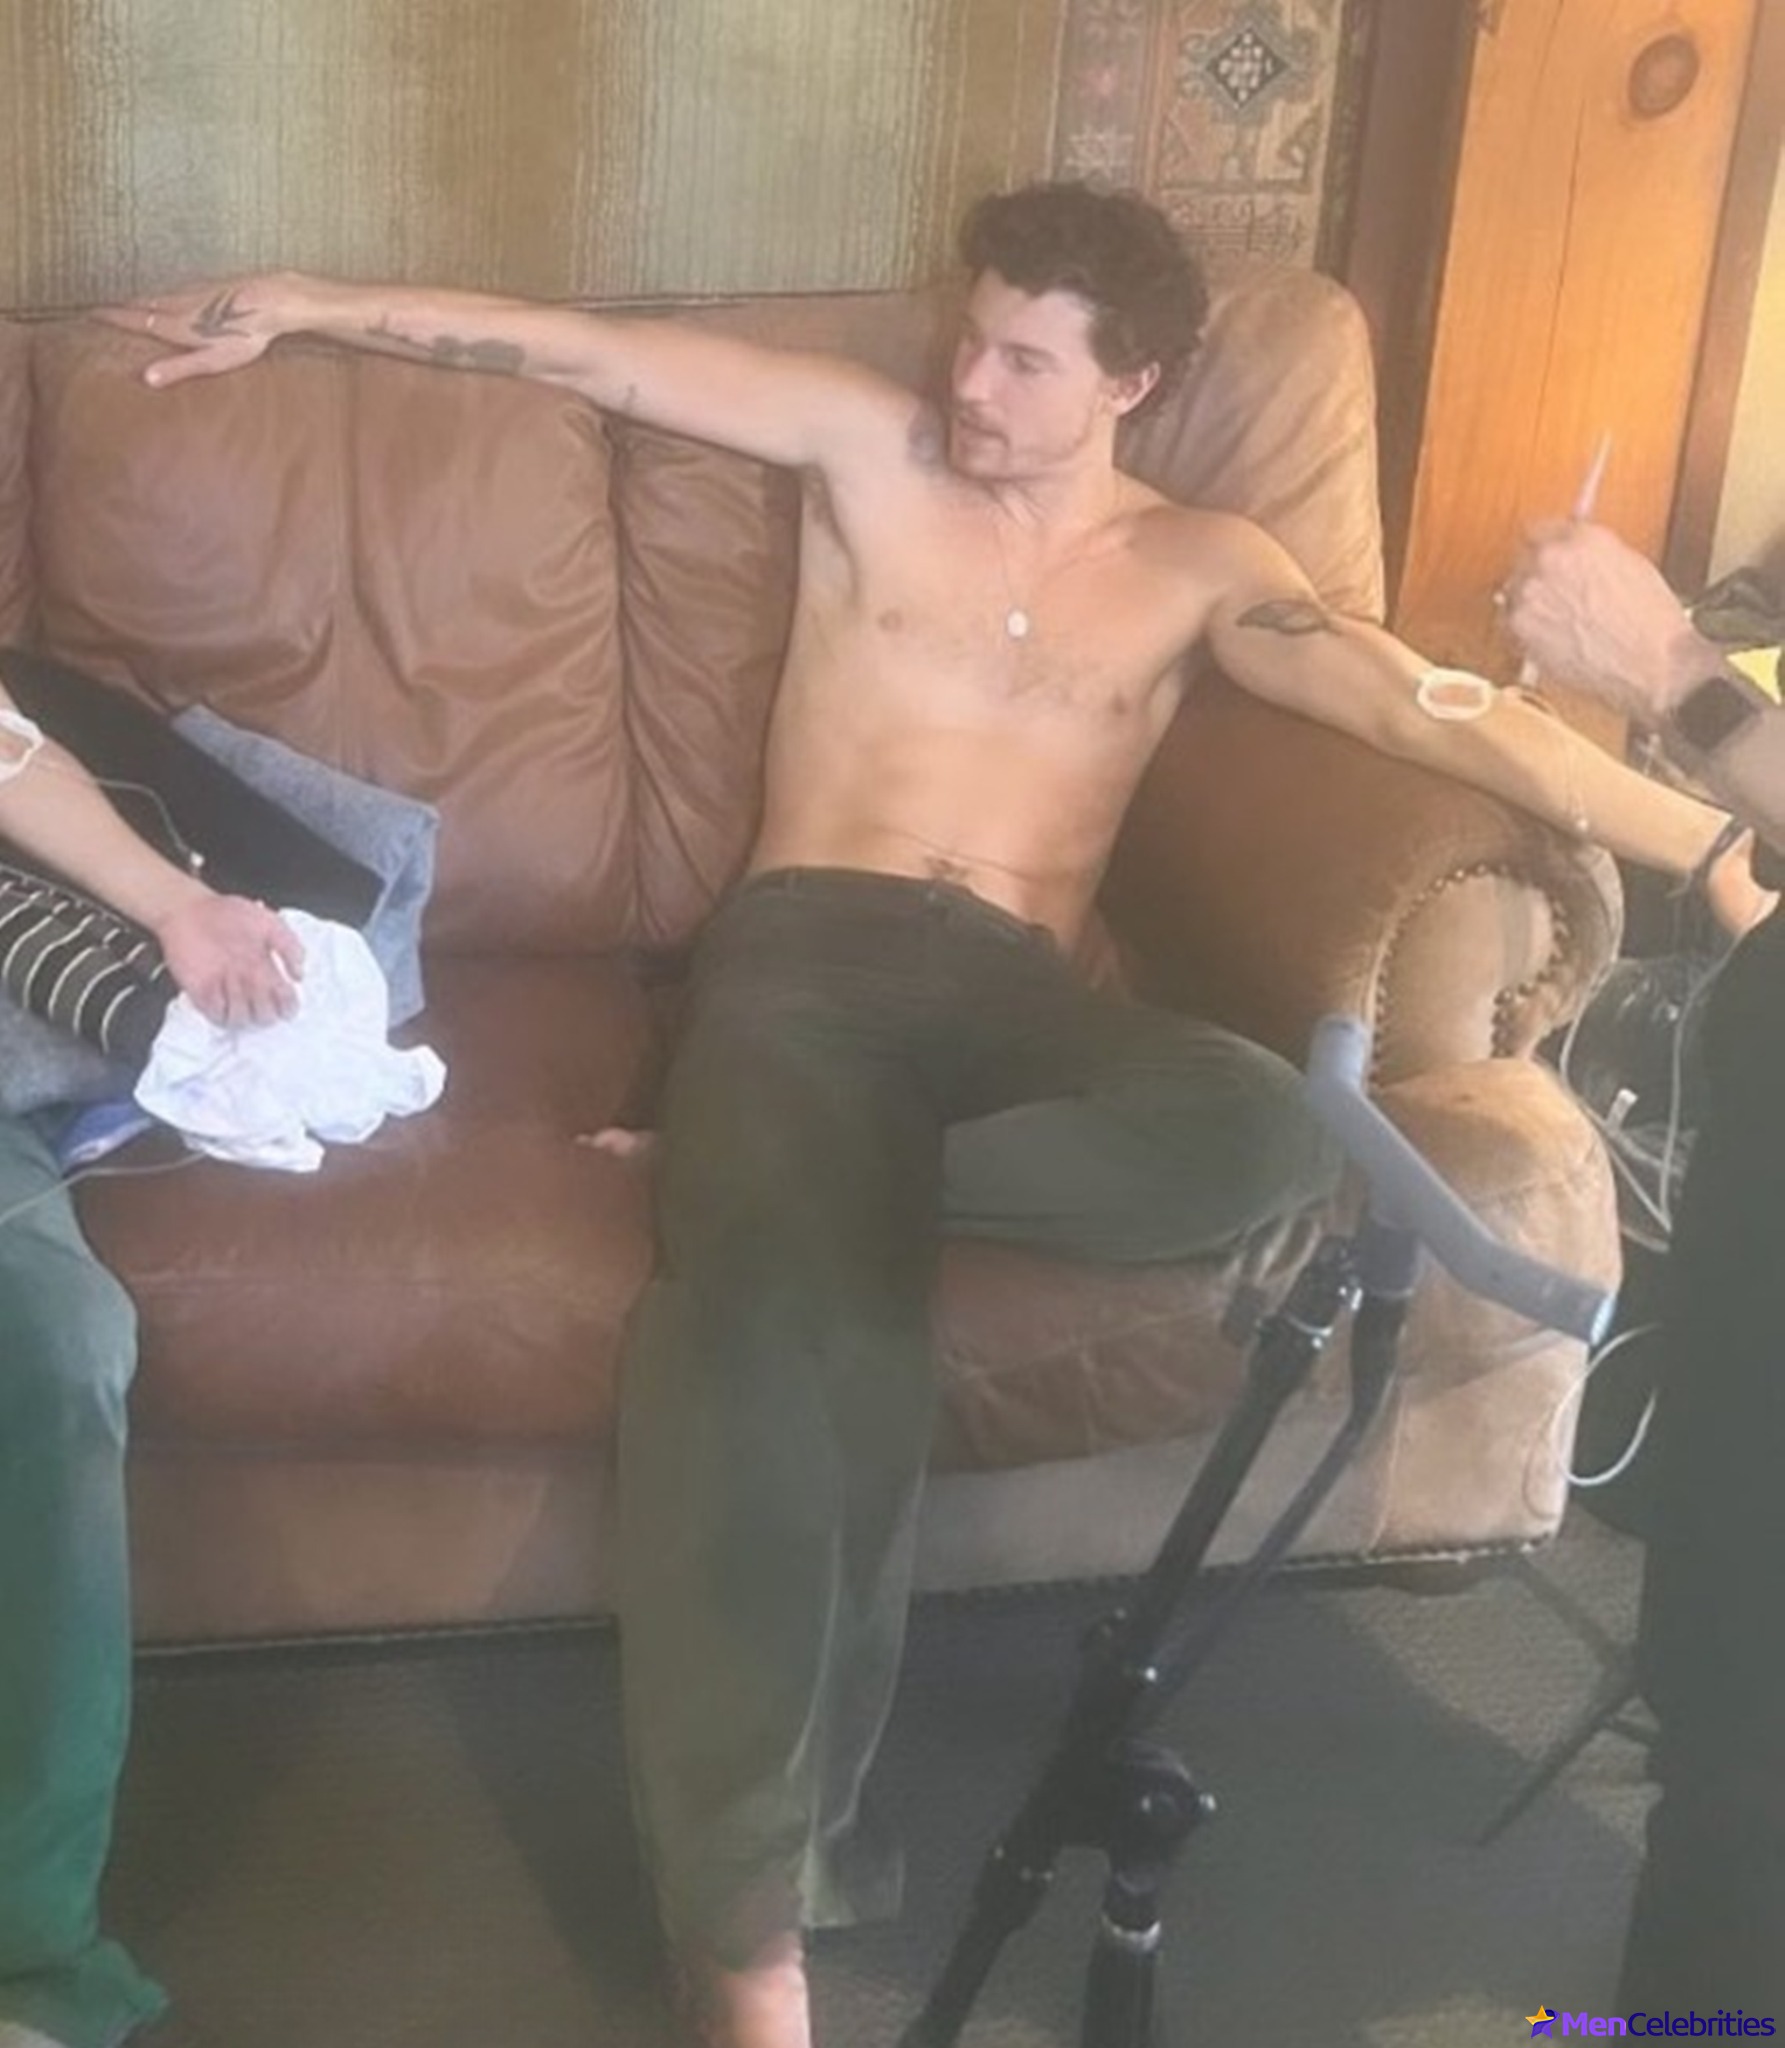 Shawn Mendes shows off his nipples in hot photoshoot